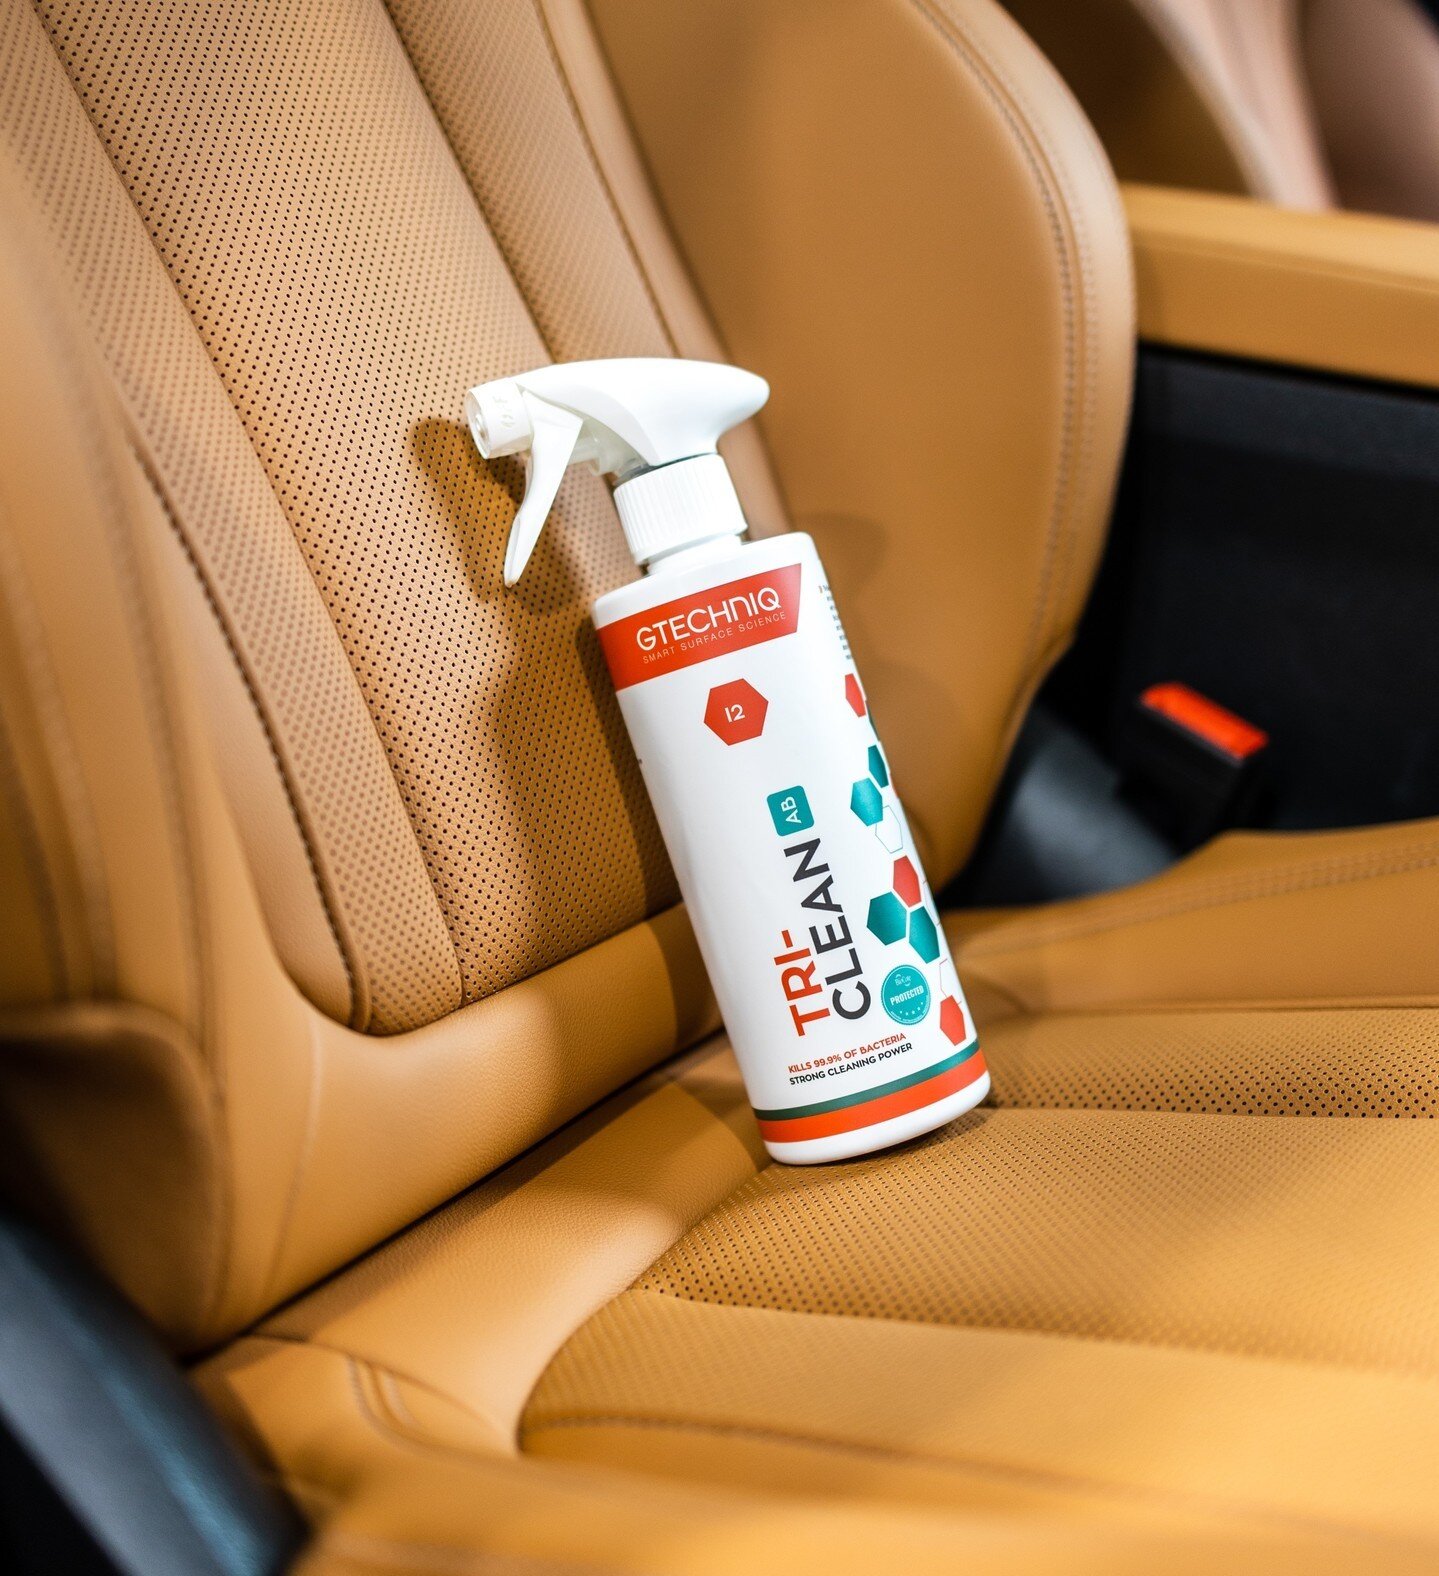 Don't forget about the interior of your car this season. When you book with CT Ceramic Coatings, rest assured we treat your interior just as we treat your car's exterior. We use Gtechniq's Tri-Clean because it gives us the best cleaning for our custo